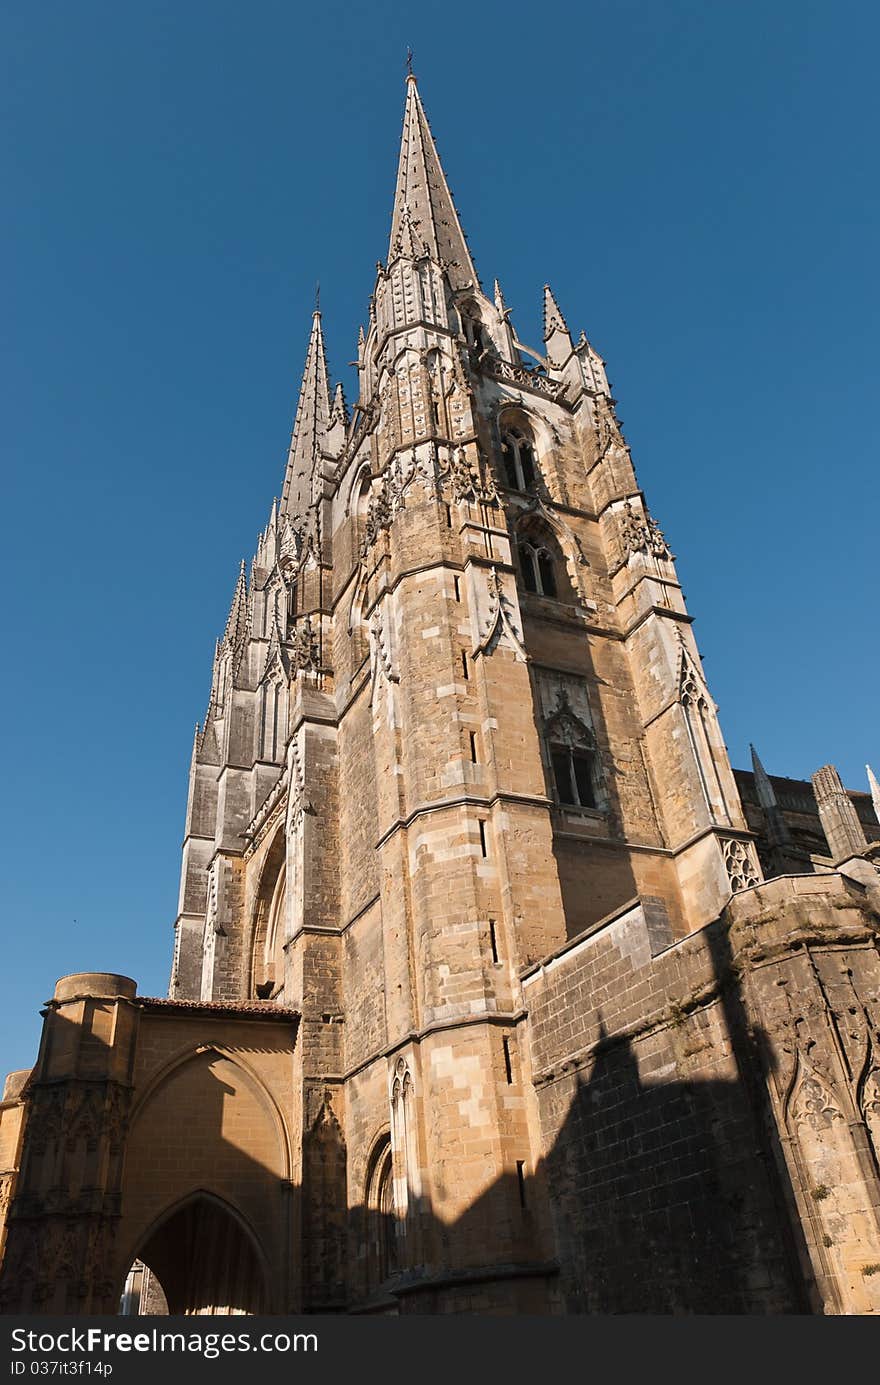 Cathedral of Bayonne with one spire